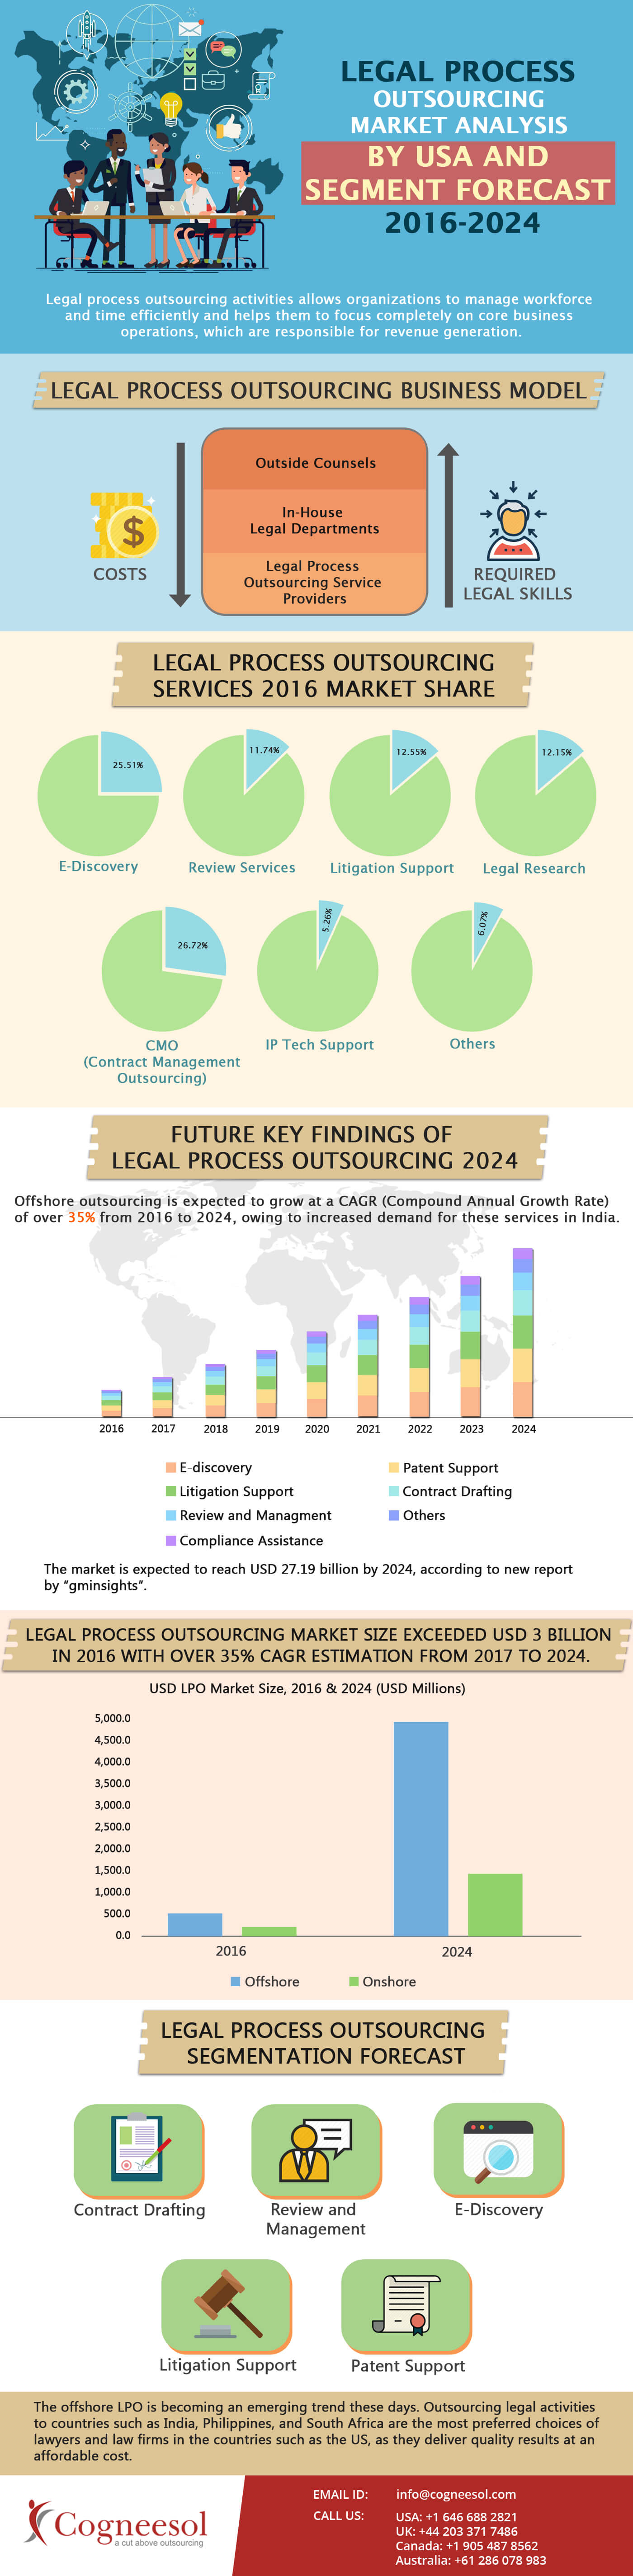 legal process outsourcinf